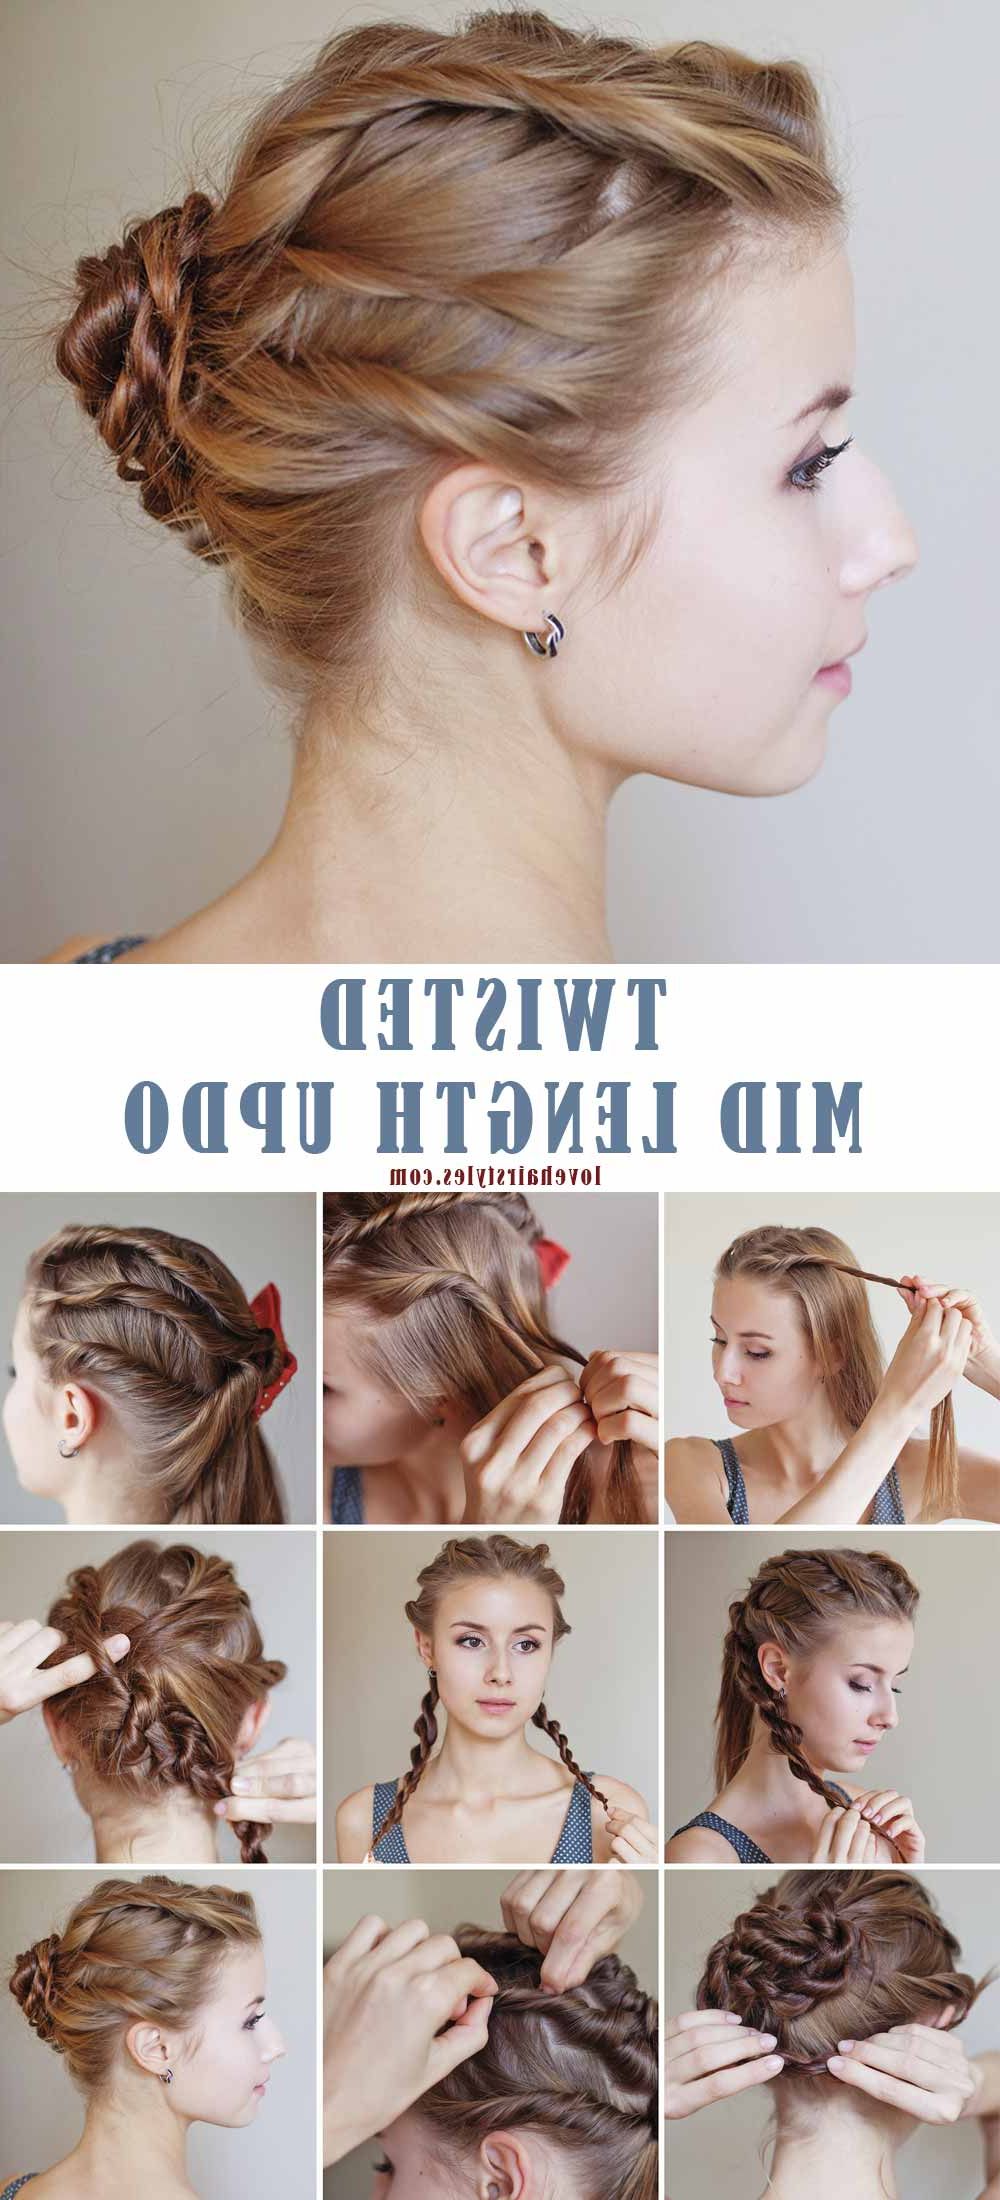 15 Perfectly Easy Hairstyles For Medium Hair – Love Hairstyles With Current Medium Length Hairstyles With Top Knot (View 18 of 25)